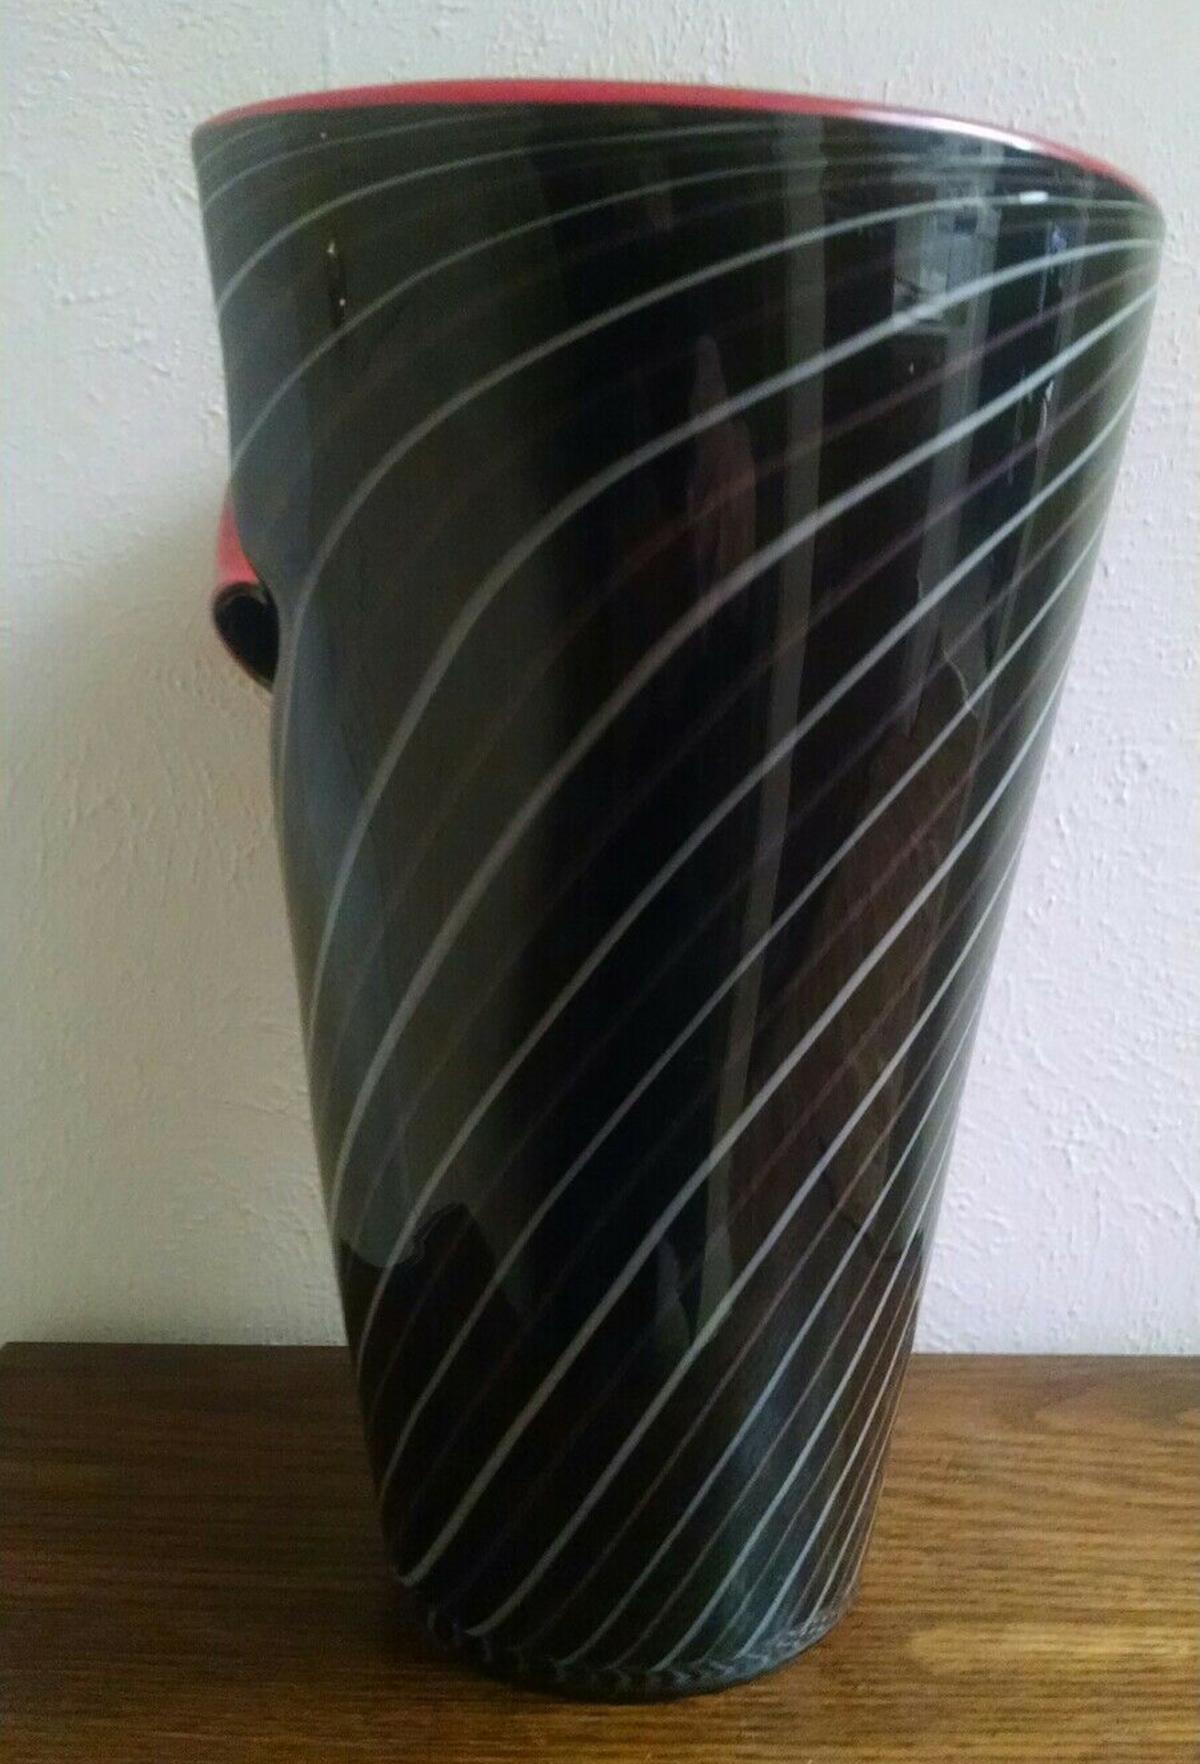 For the lovers of Murano, a spectacular large art glass vase created by Alberto Dona for Barovier and Toso Murano, Italy. The vase is cased black with white and grey stripes. It has a cut and folded back section along the rim to show its fabulous